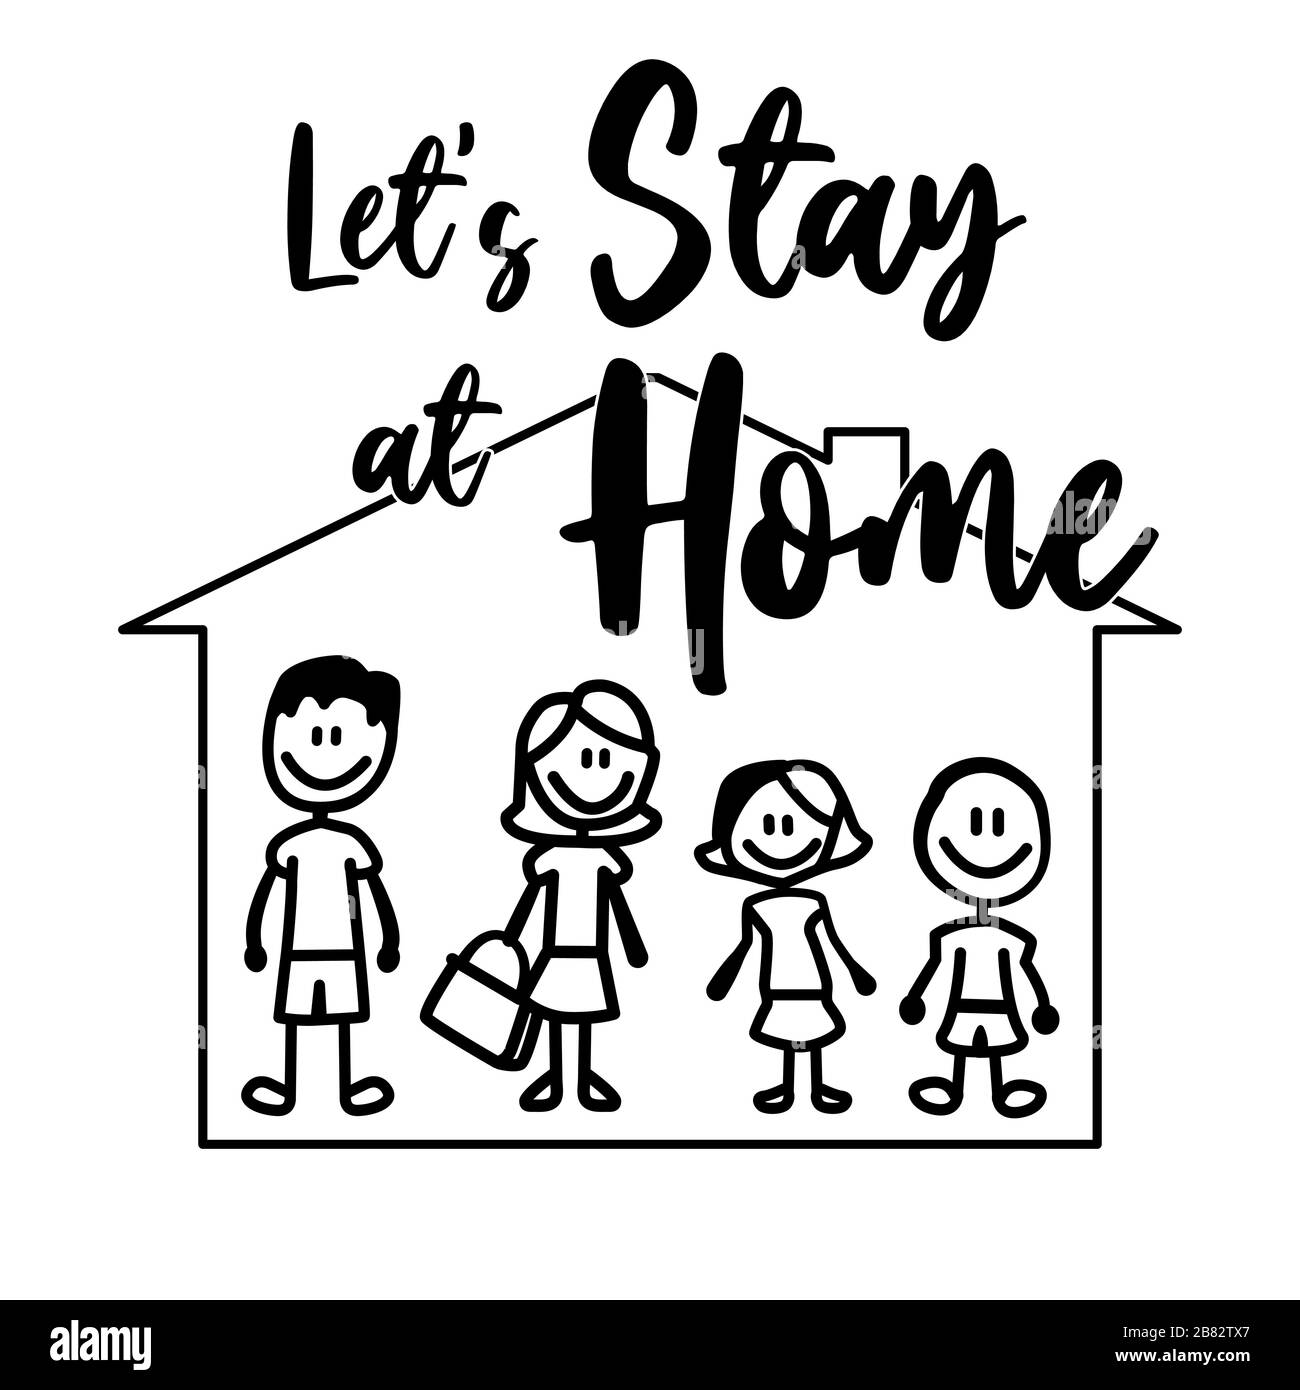 Stay at home with the self quarantine to help slow the outbreak and protect the spread of the virus. Self-isolating family for safety. vector illustra Stock Vector